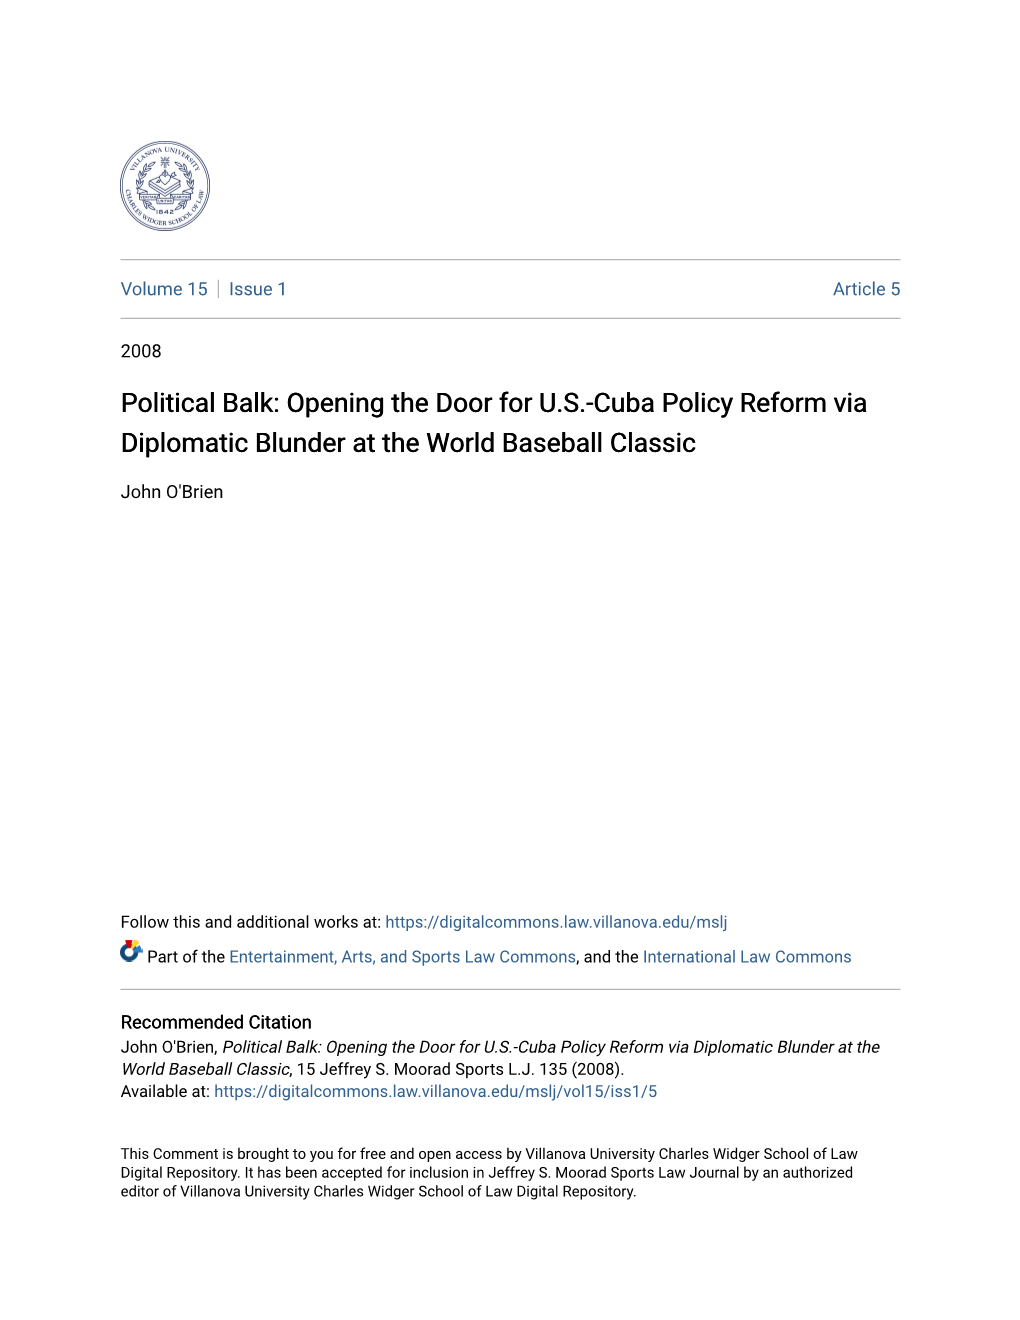 Opening the Door for US-Cuba Policy Reform Via Diplomatic Blunder At